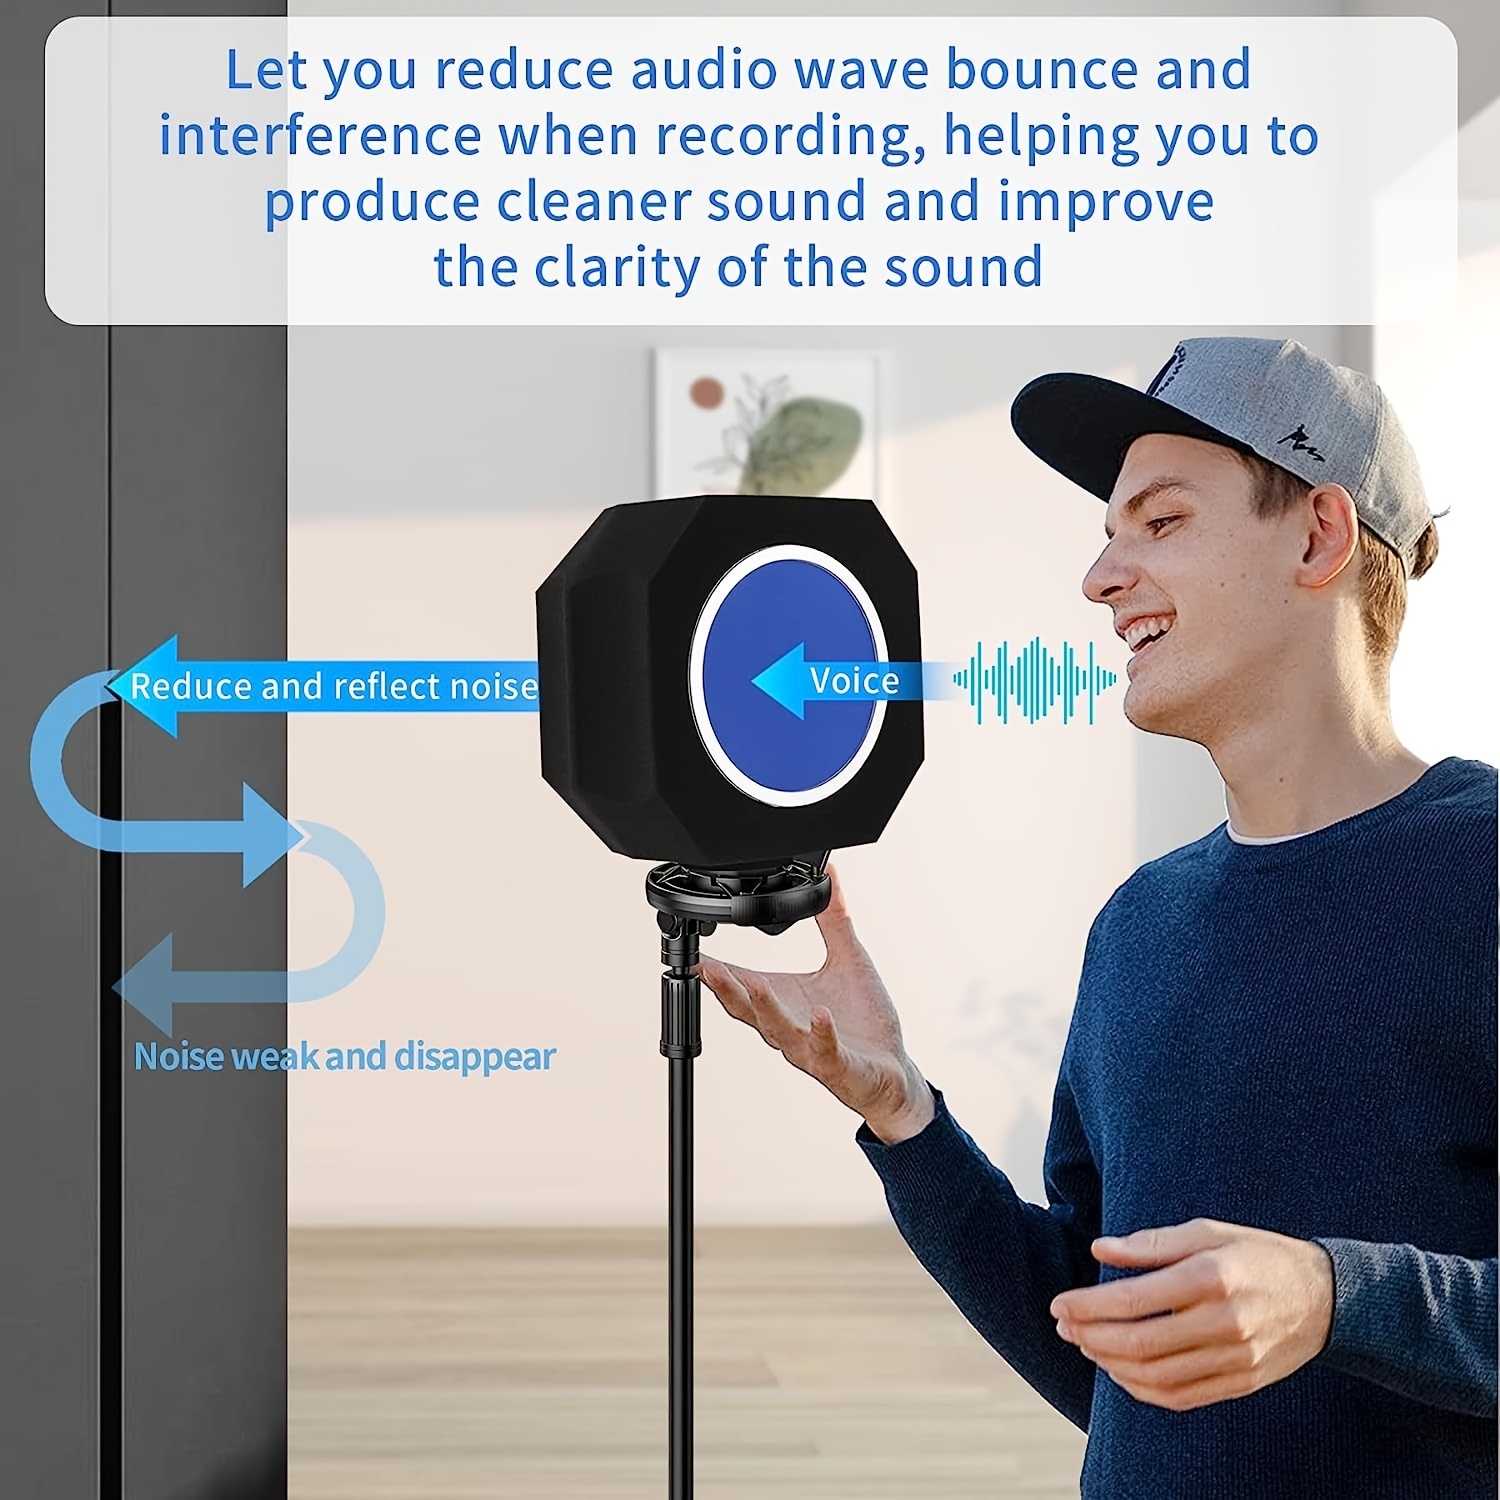  Microphone Pop Filter, Wind Shield Acoustic Filter for Record  Studios, Mic Sound-Absorbing Foam Vocal Isolation Foam Ball Noise Canceling  Sponge, Five-sided Sealing Design Microphone Windscreen : Musical  Instruments